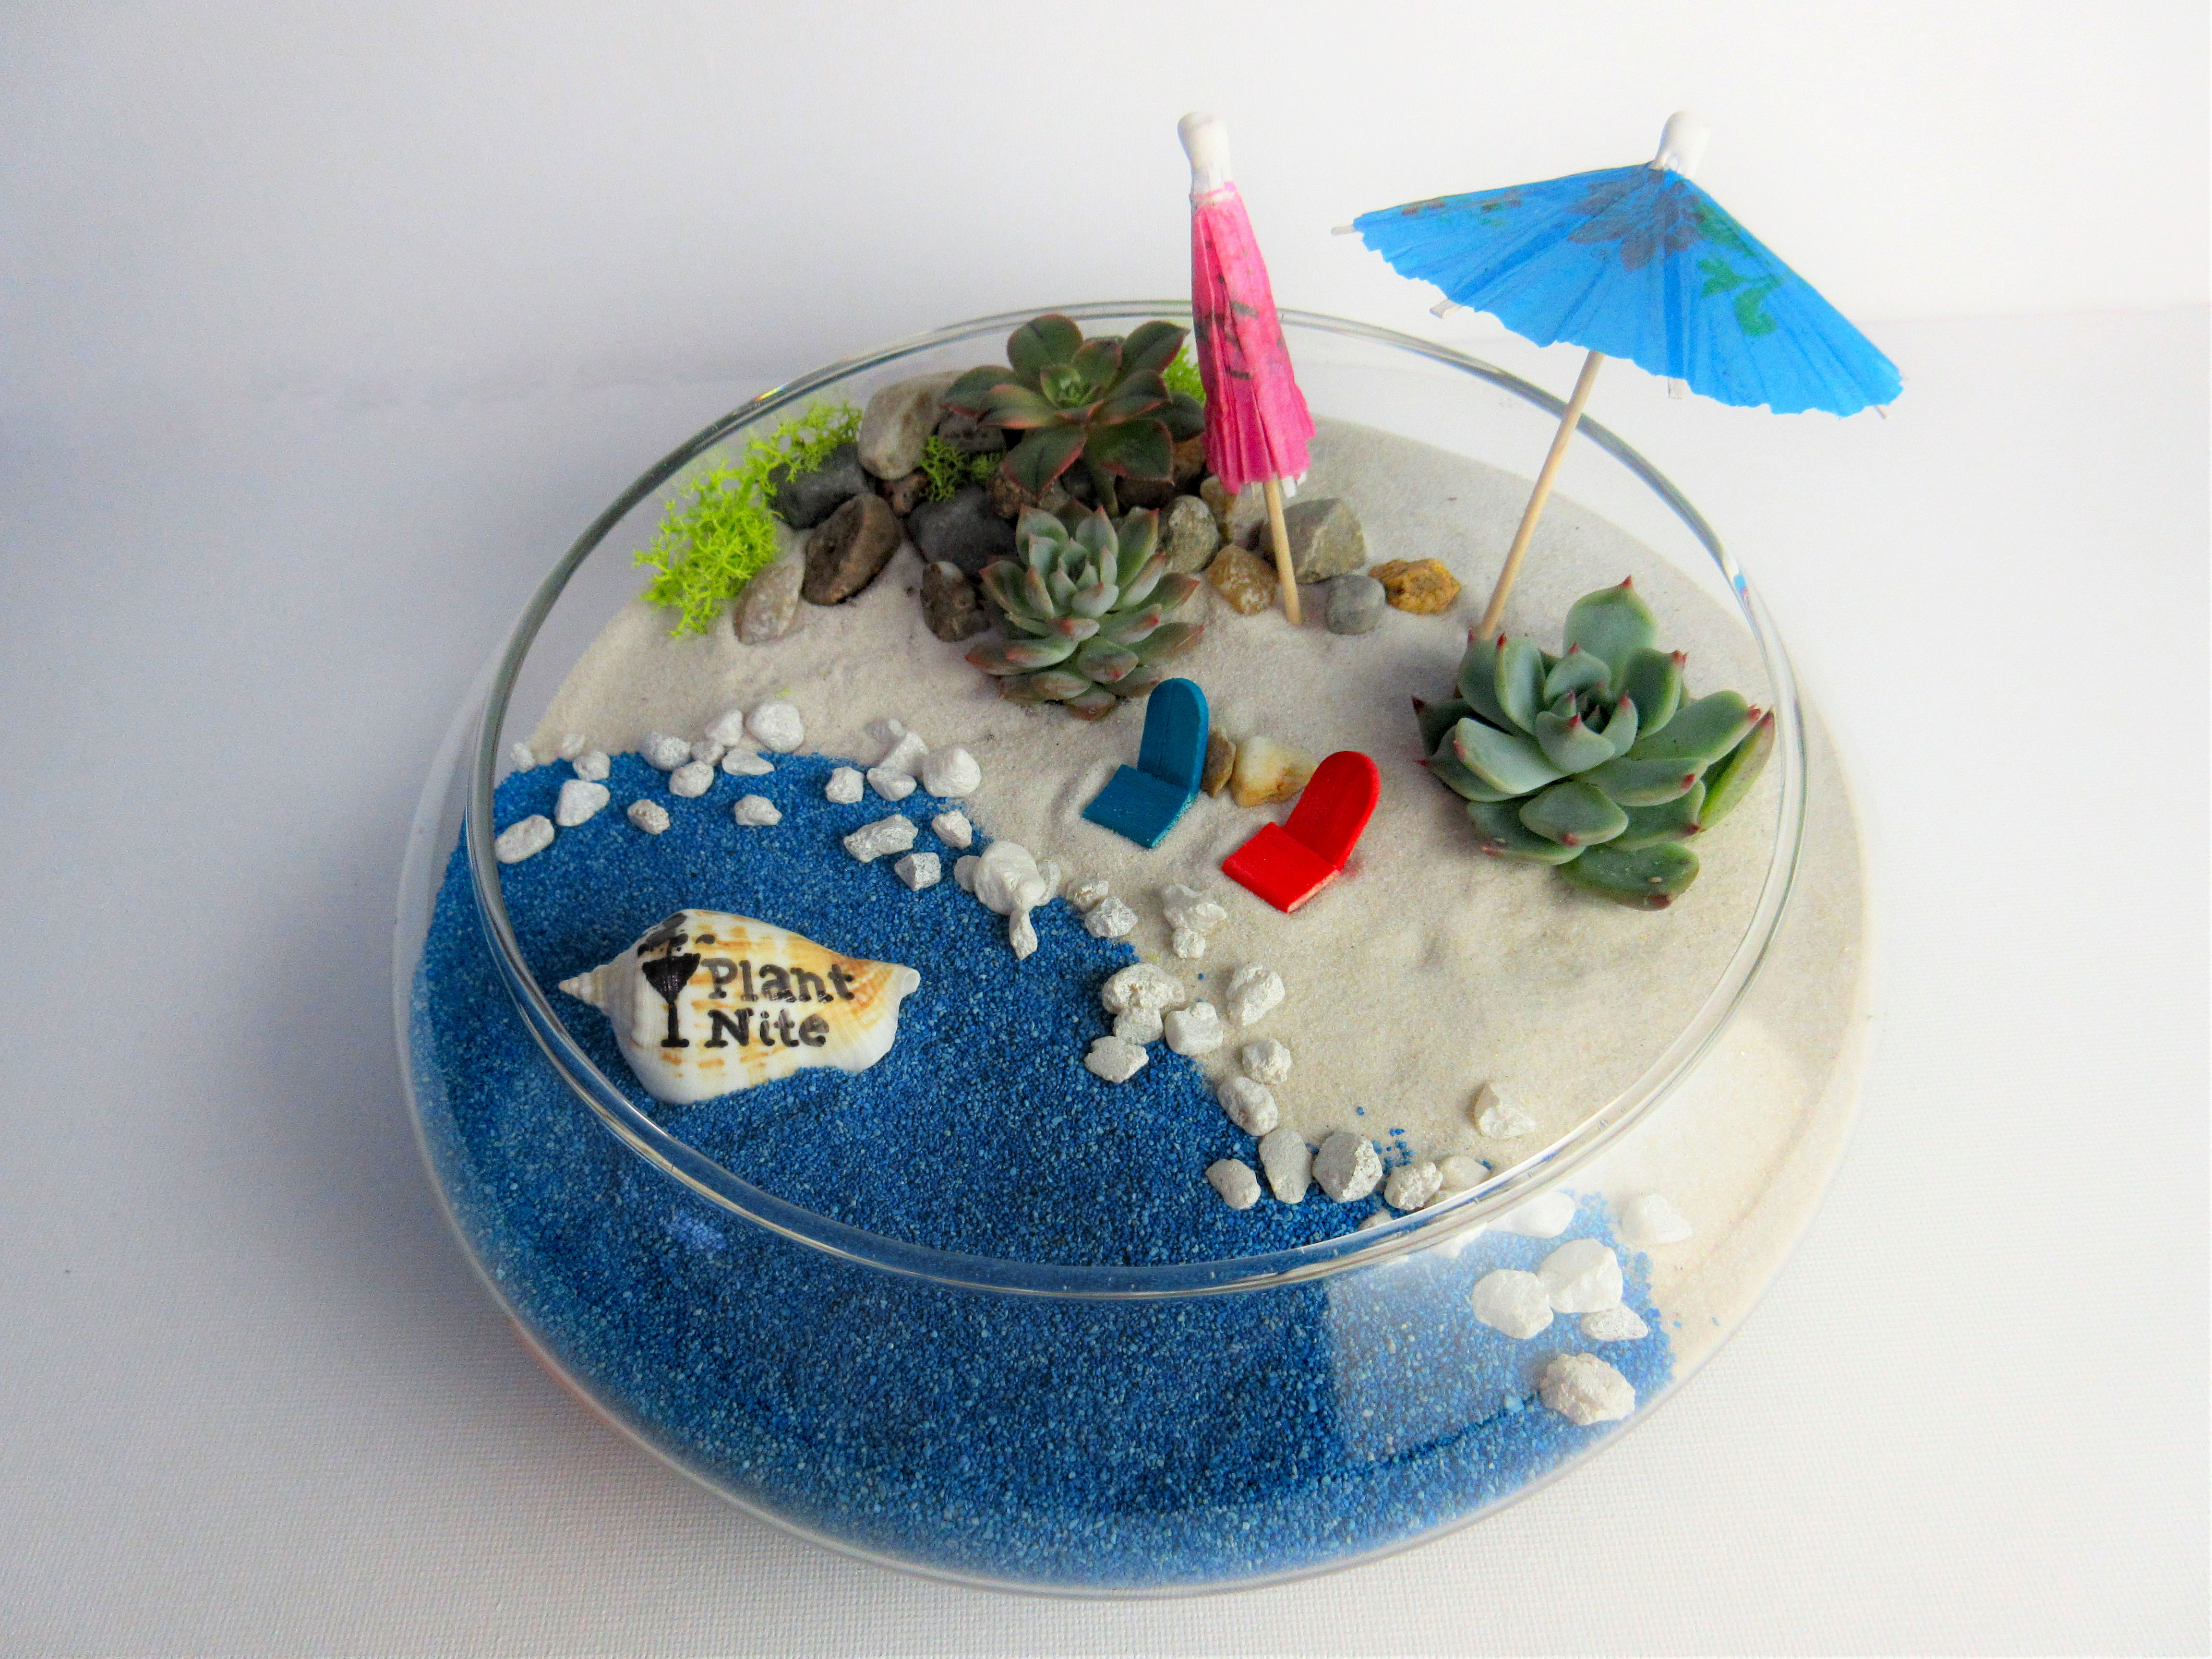 A Succulent Terrarium in Lily Bowl  Life is a Beach plant nite project by Yaymaker